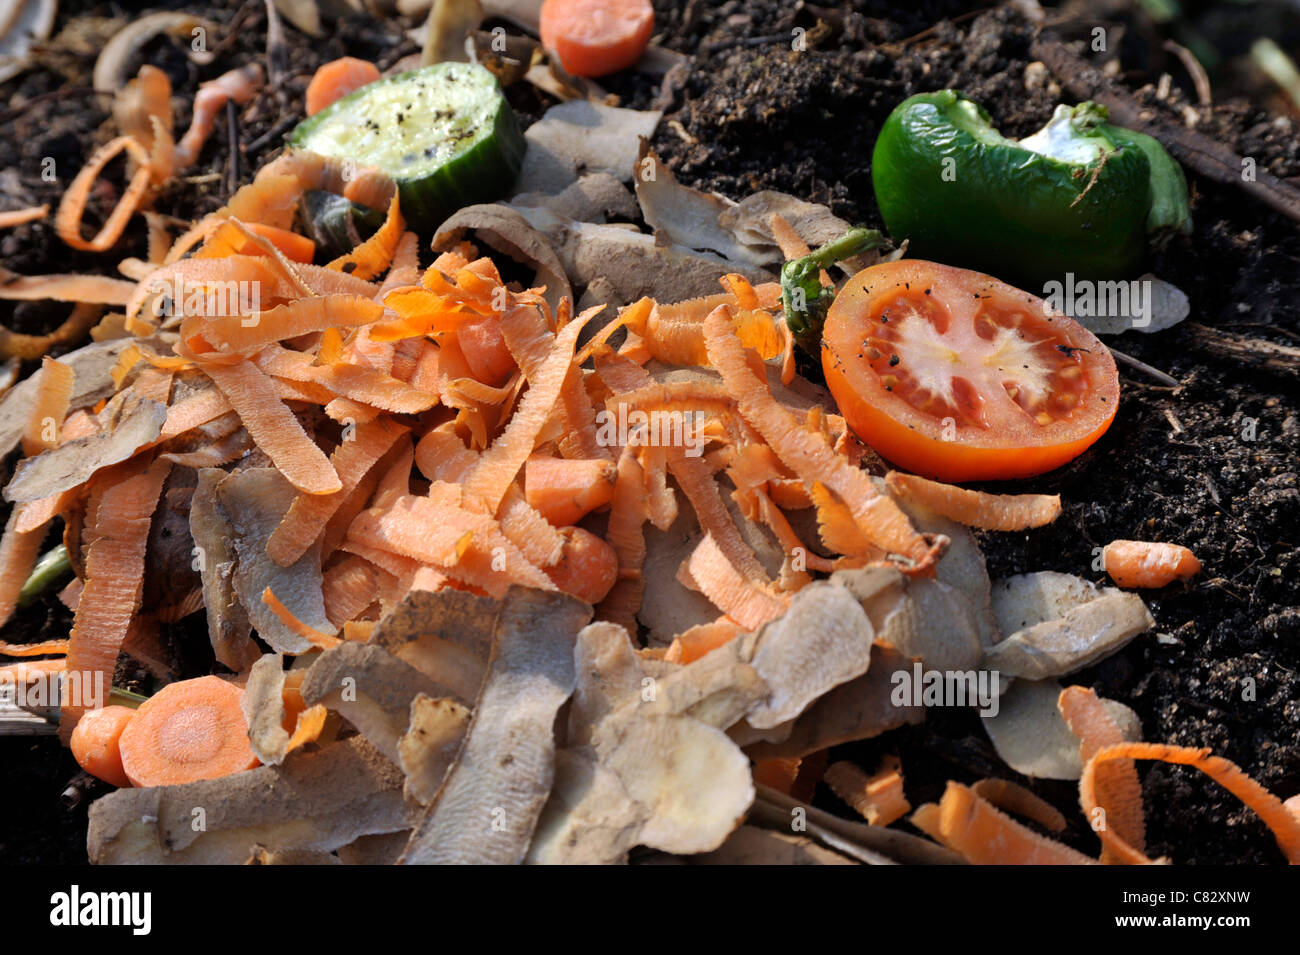 Uncooked food waste such as carrot and potato peelings on a compost heap. Stock Photo